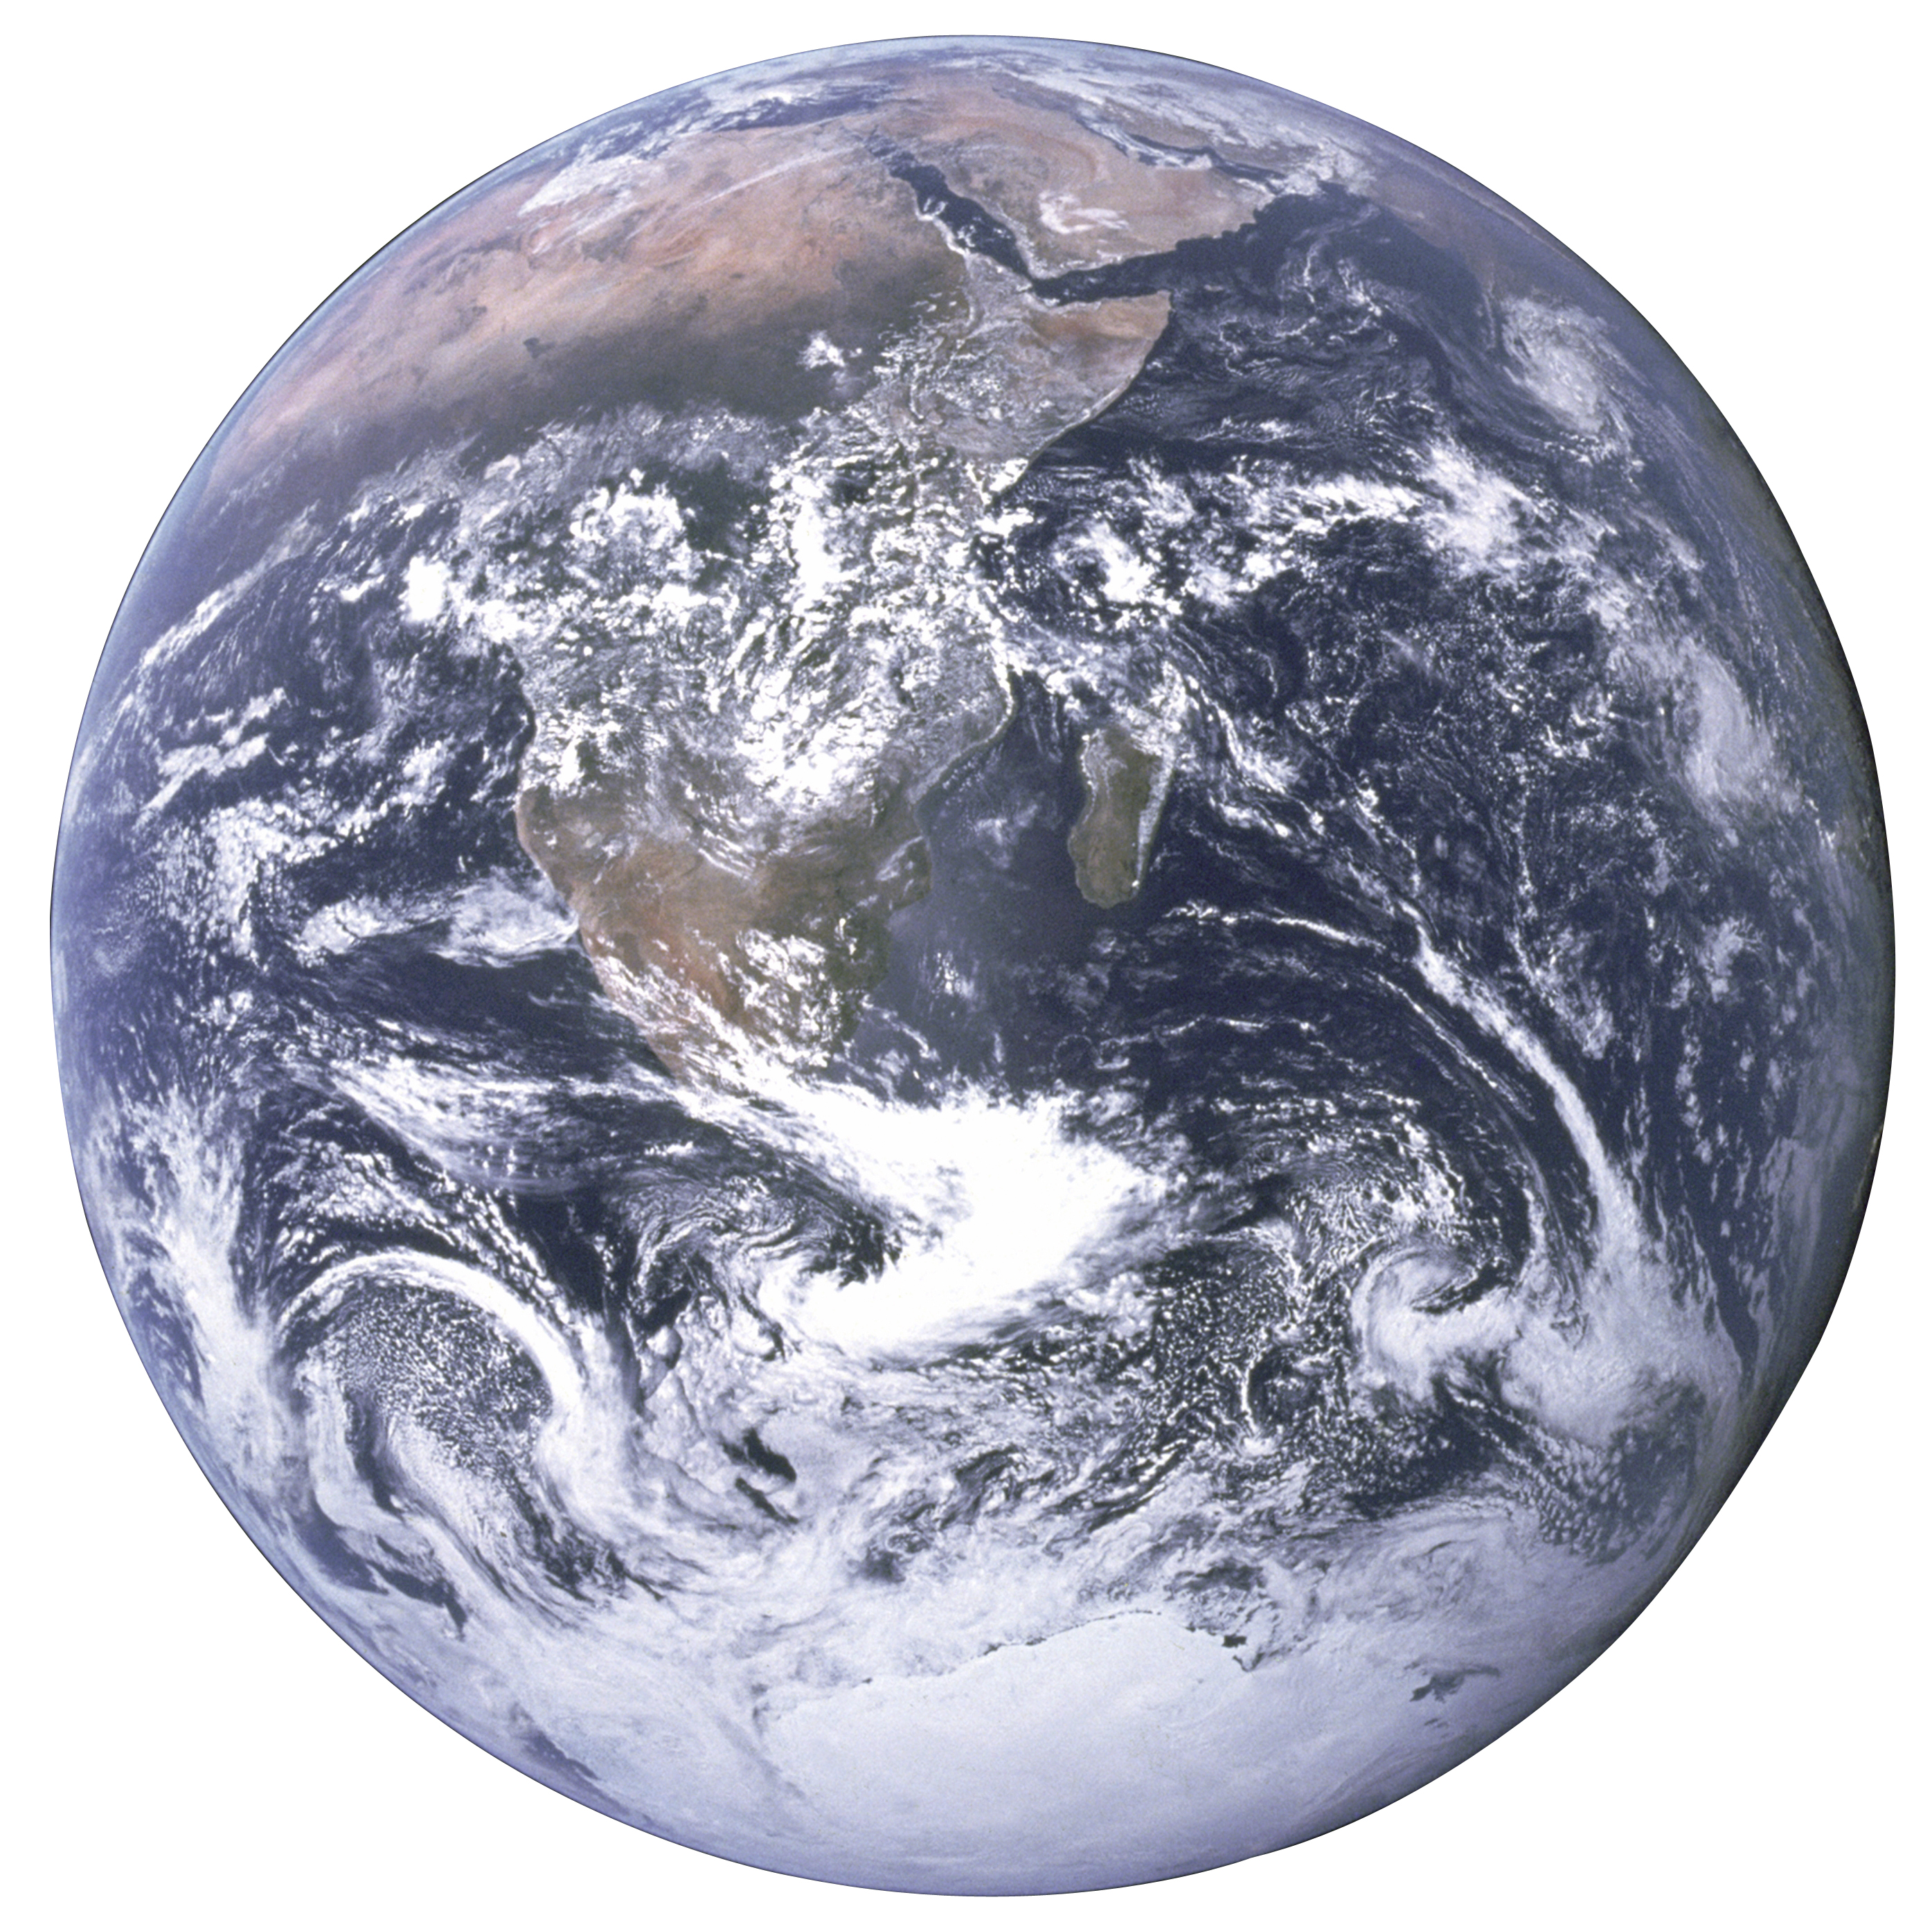 Earth images pluspng filethe. Png files with transparent background